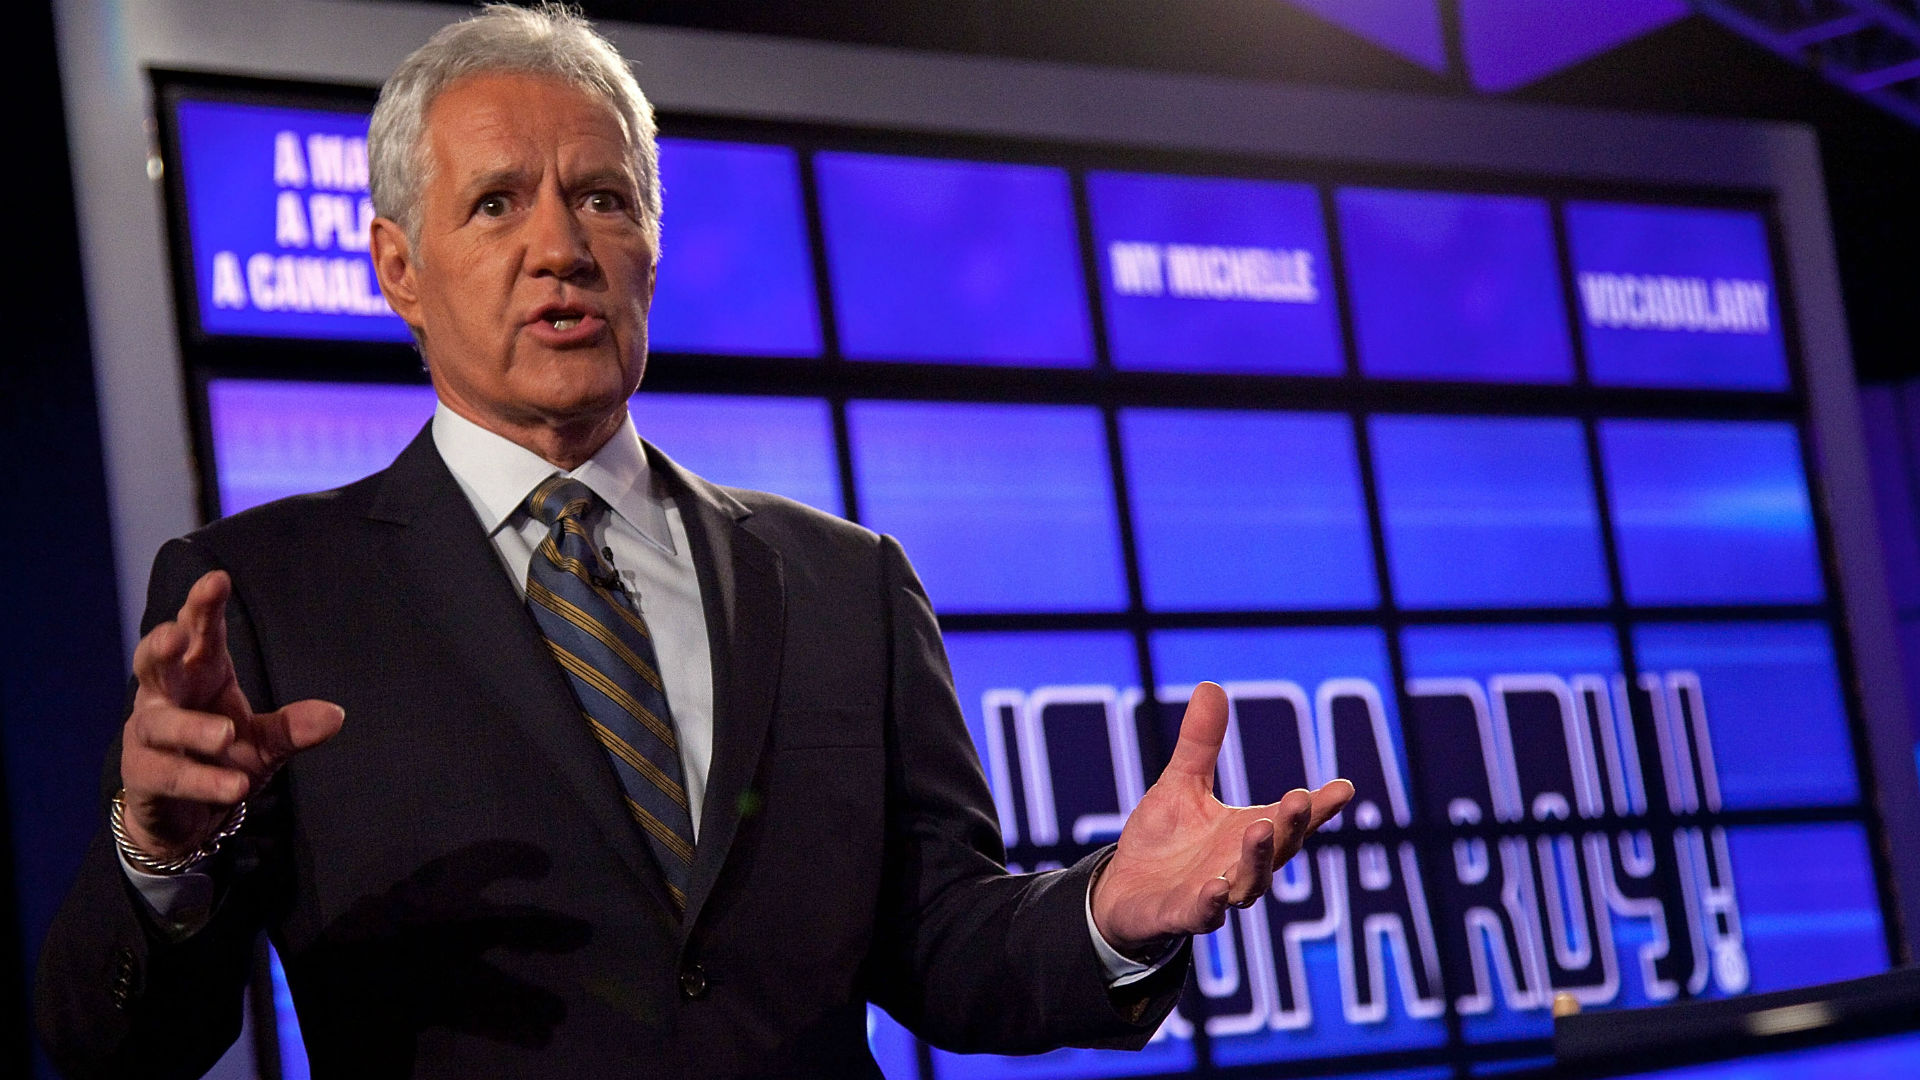 Watch Alex Trebek ham it up as 'Jeopardy!' contestants whiff on five straight football clues